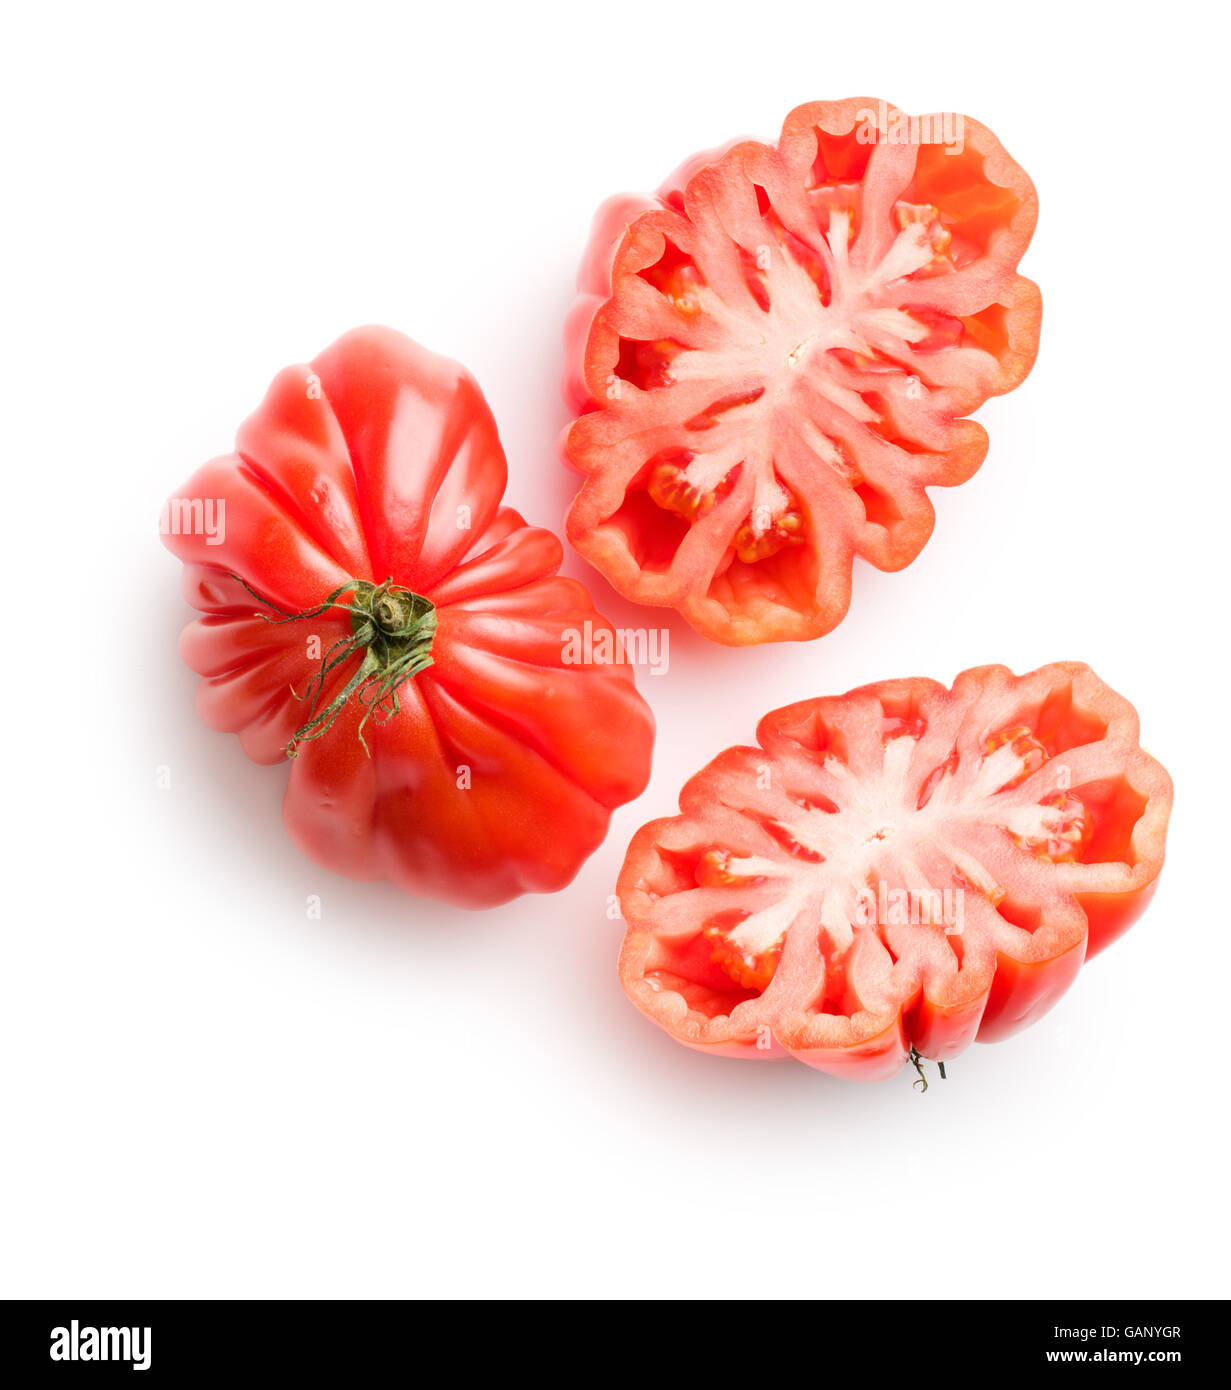 Coeur De Boeuf. Beefsteak tomatoes isolated on white background. Stock Photo